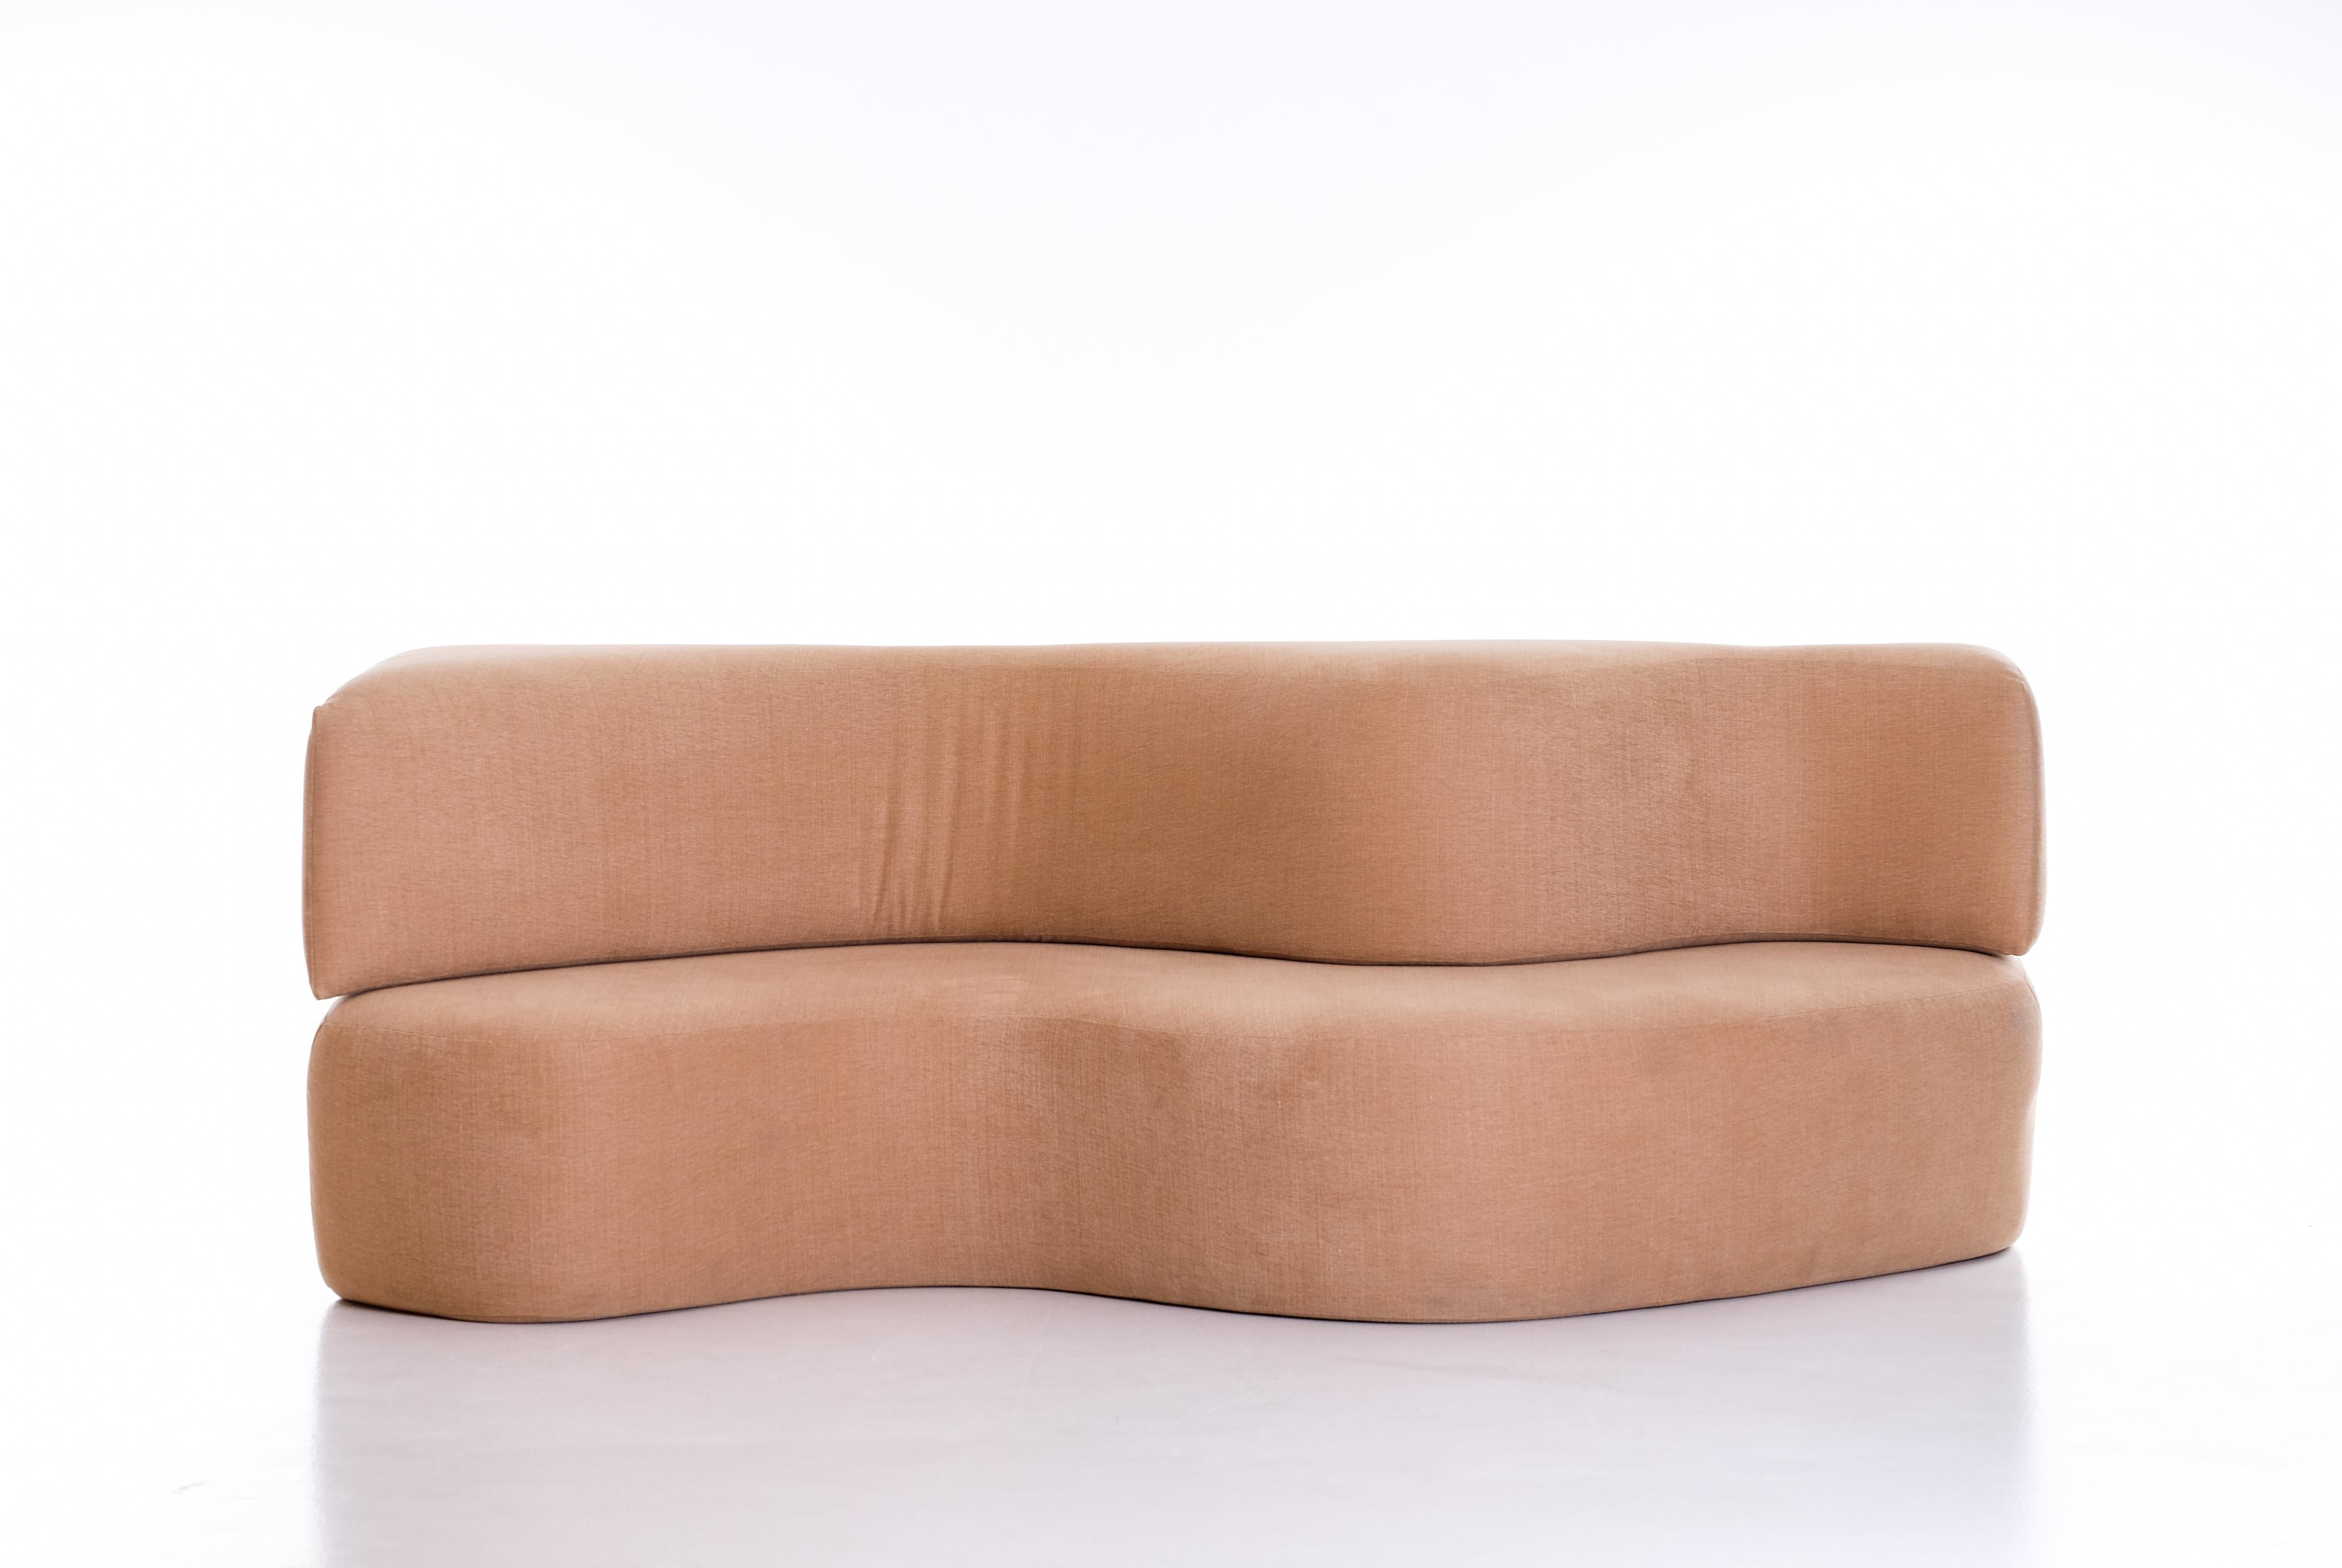 Originally designed in 1966 by the Florentine Radical group Archizoom, this was the first sofa without a conventional frame. It is composed of two waves made from a polyurethane block cut into two parts with an S-shaped incision, which can be